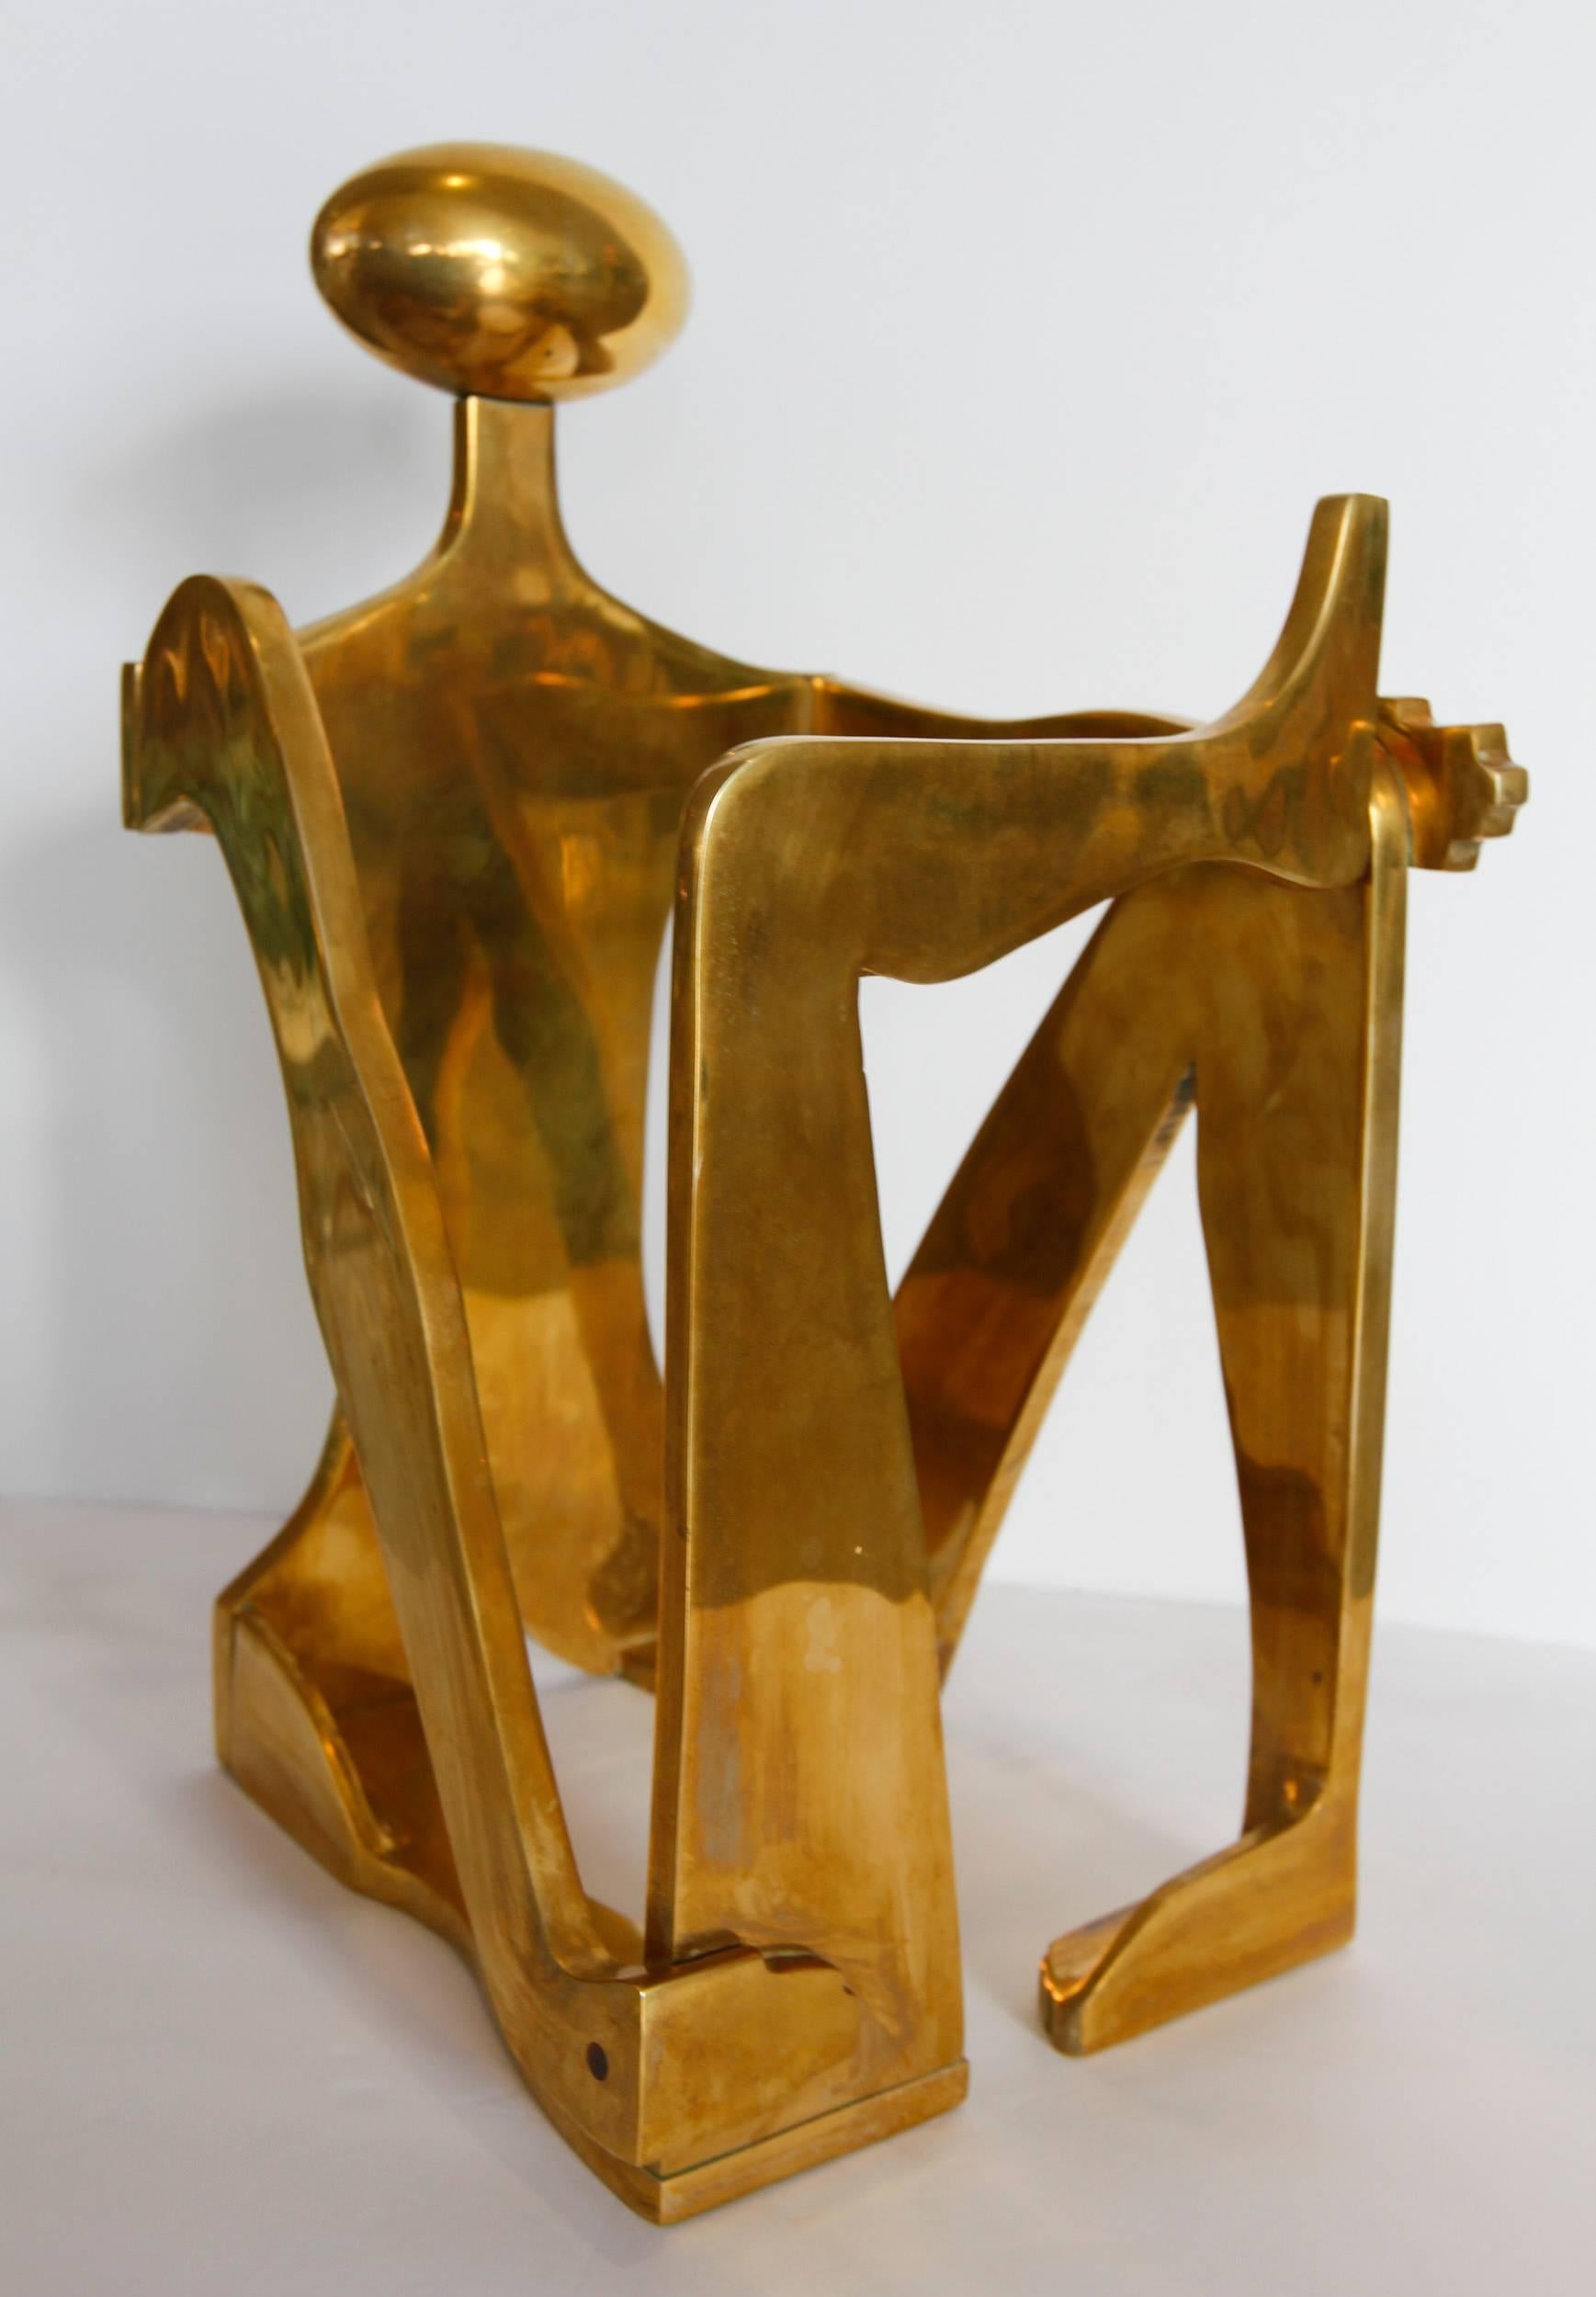 Geometric modernist figurative sculpture by sisters Arleen Eichengreen and Nancy Gensburg. The figure is attractive from all angles and demonstrates very interesting use of positive and negative space. It is signed and numbered 11 of 12.